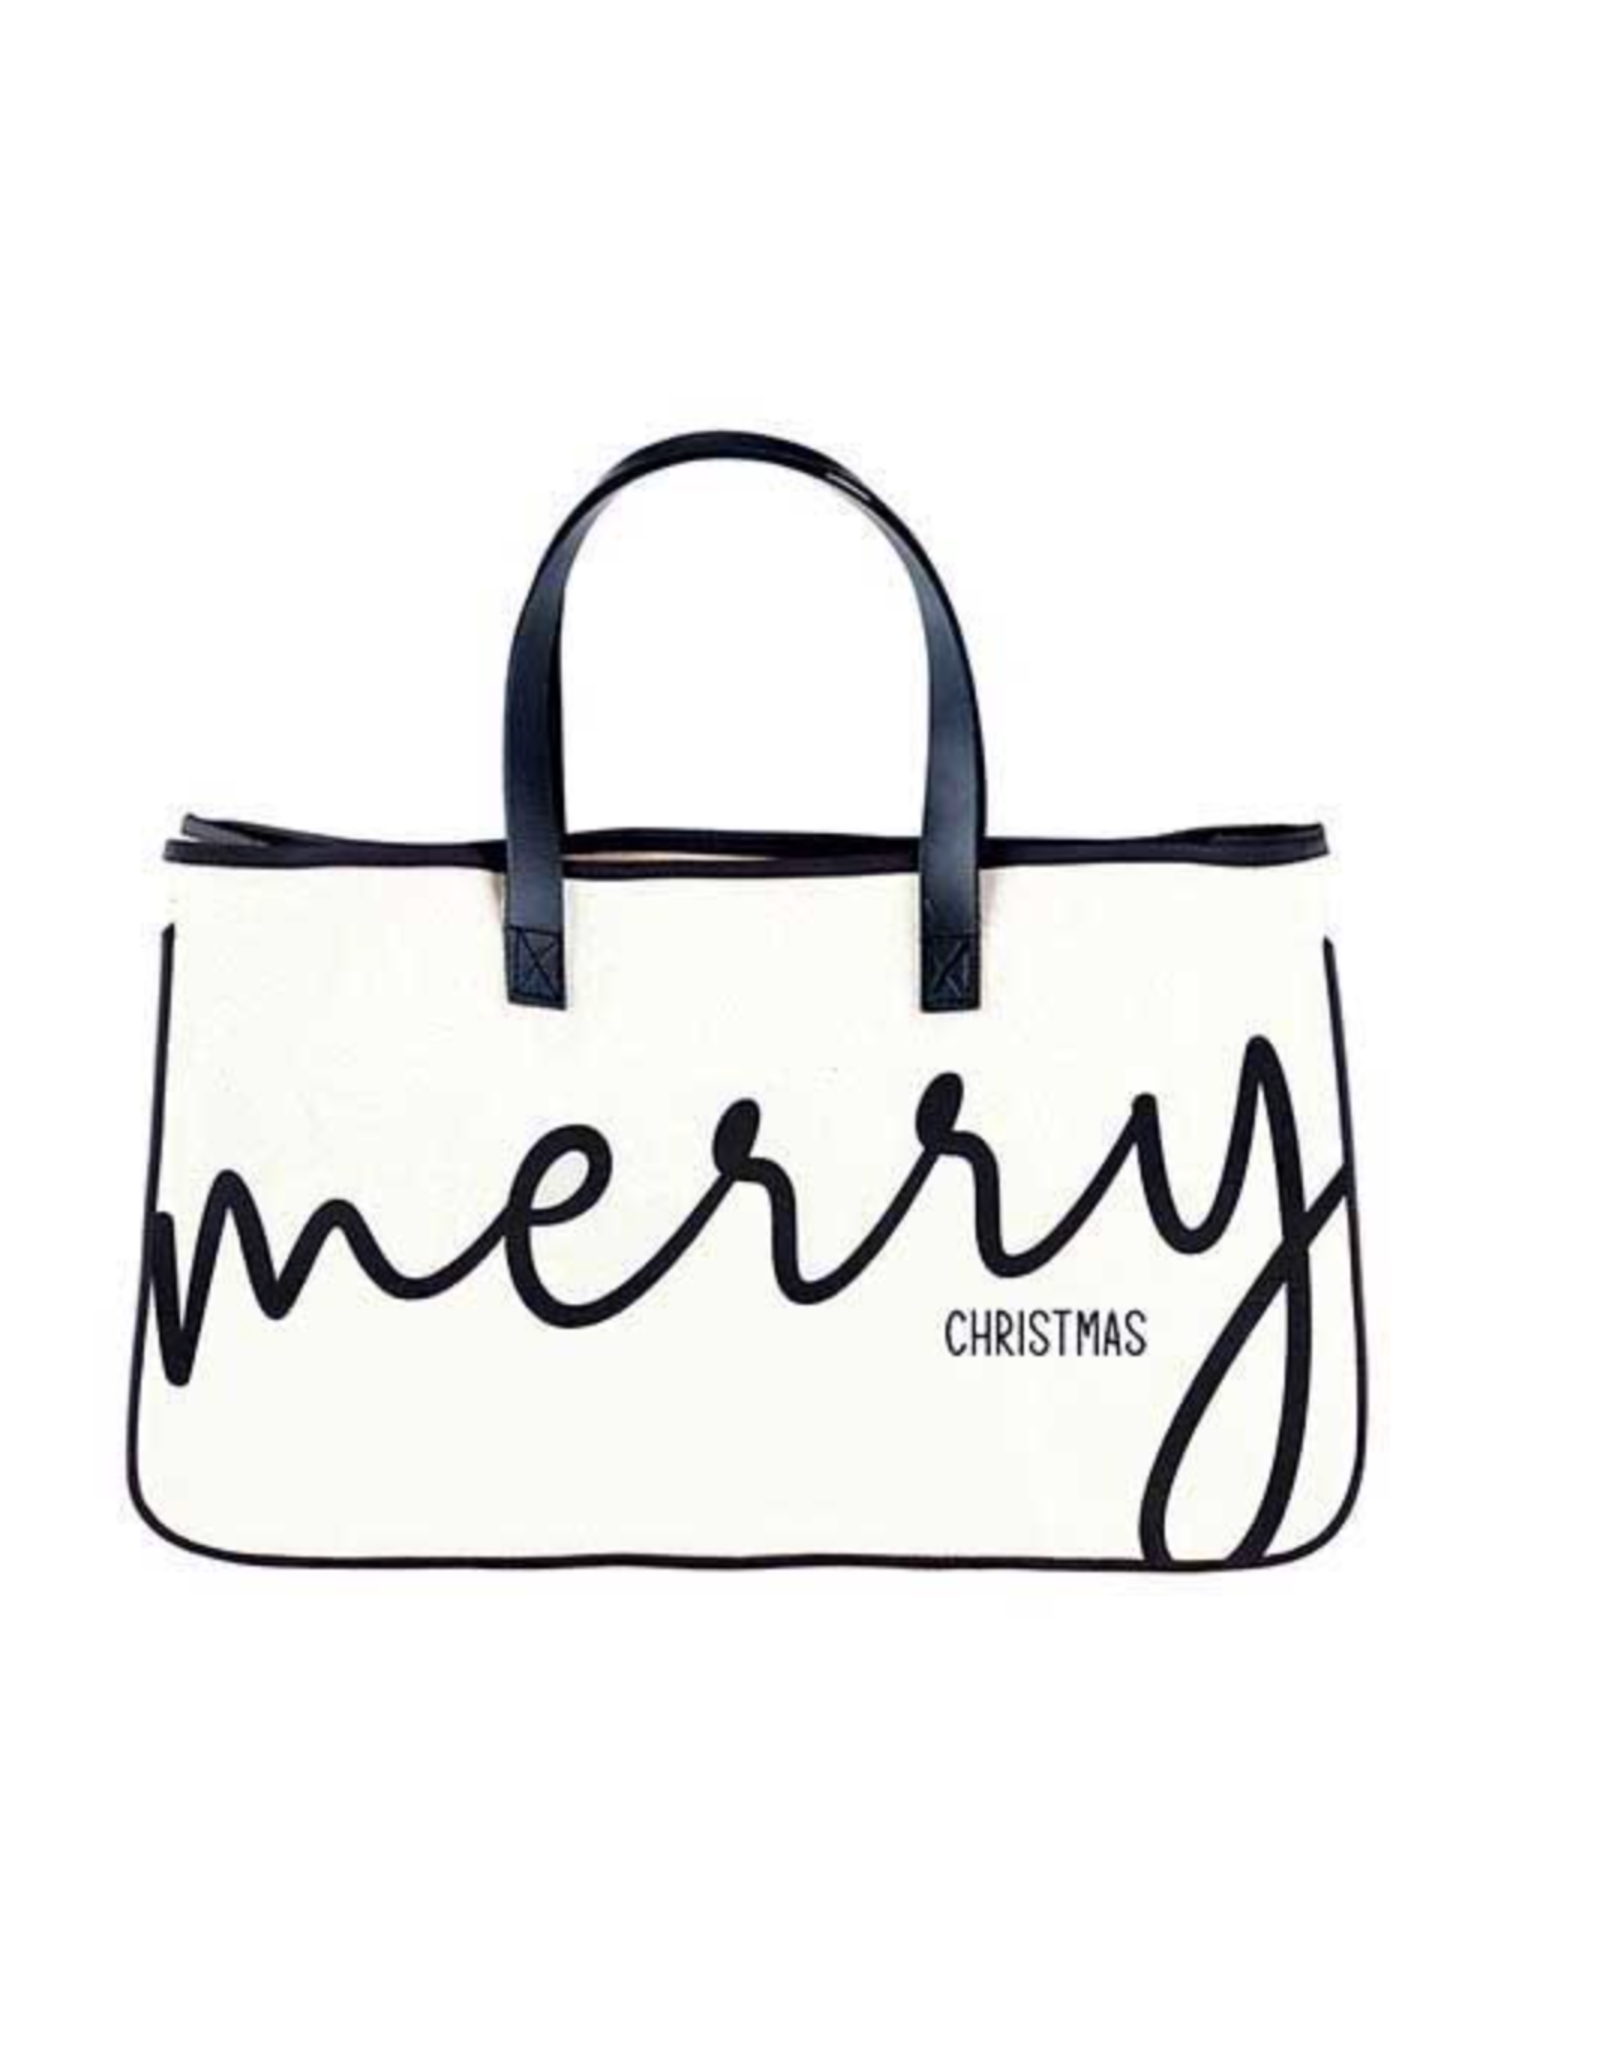 Creative Brands Merry Christmas Tote